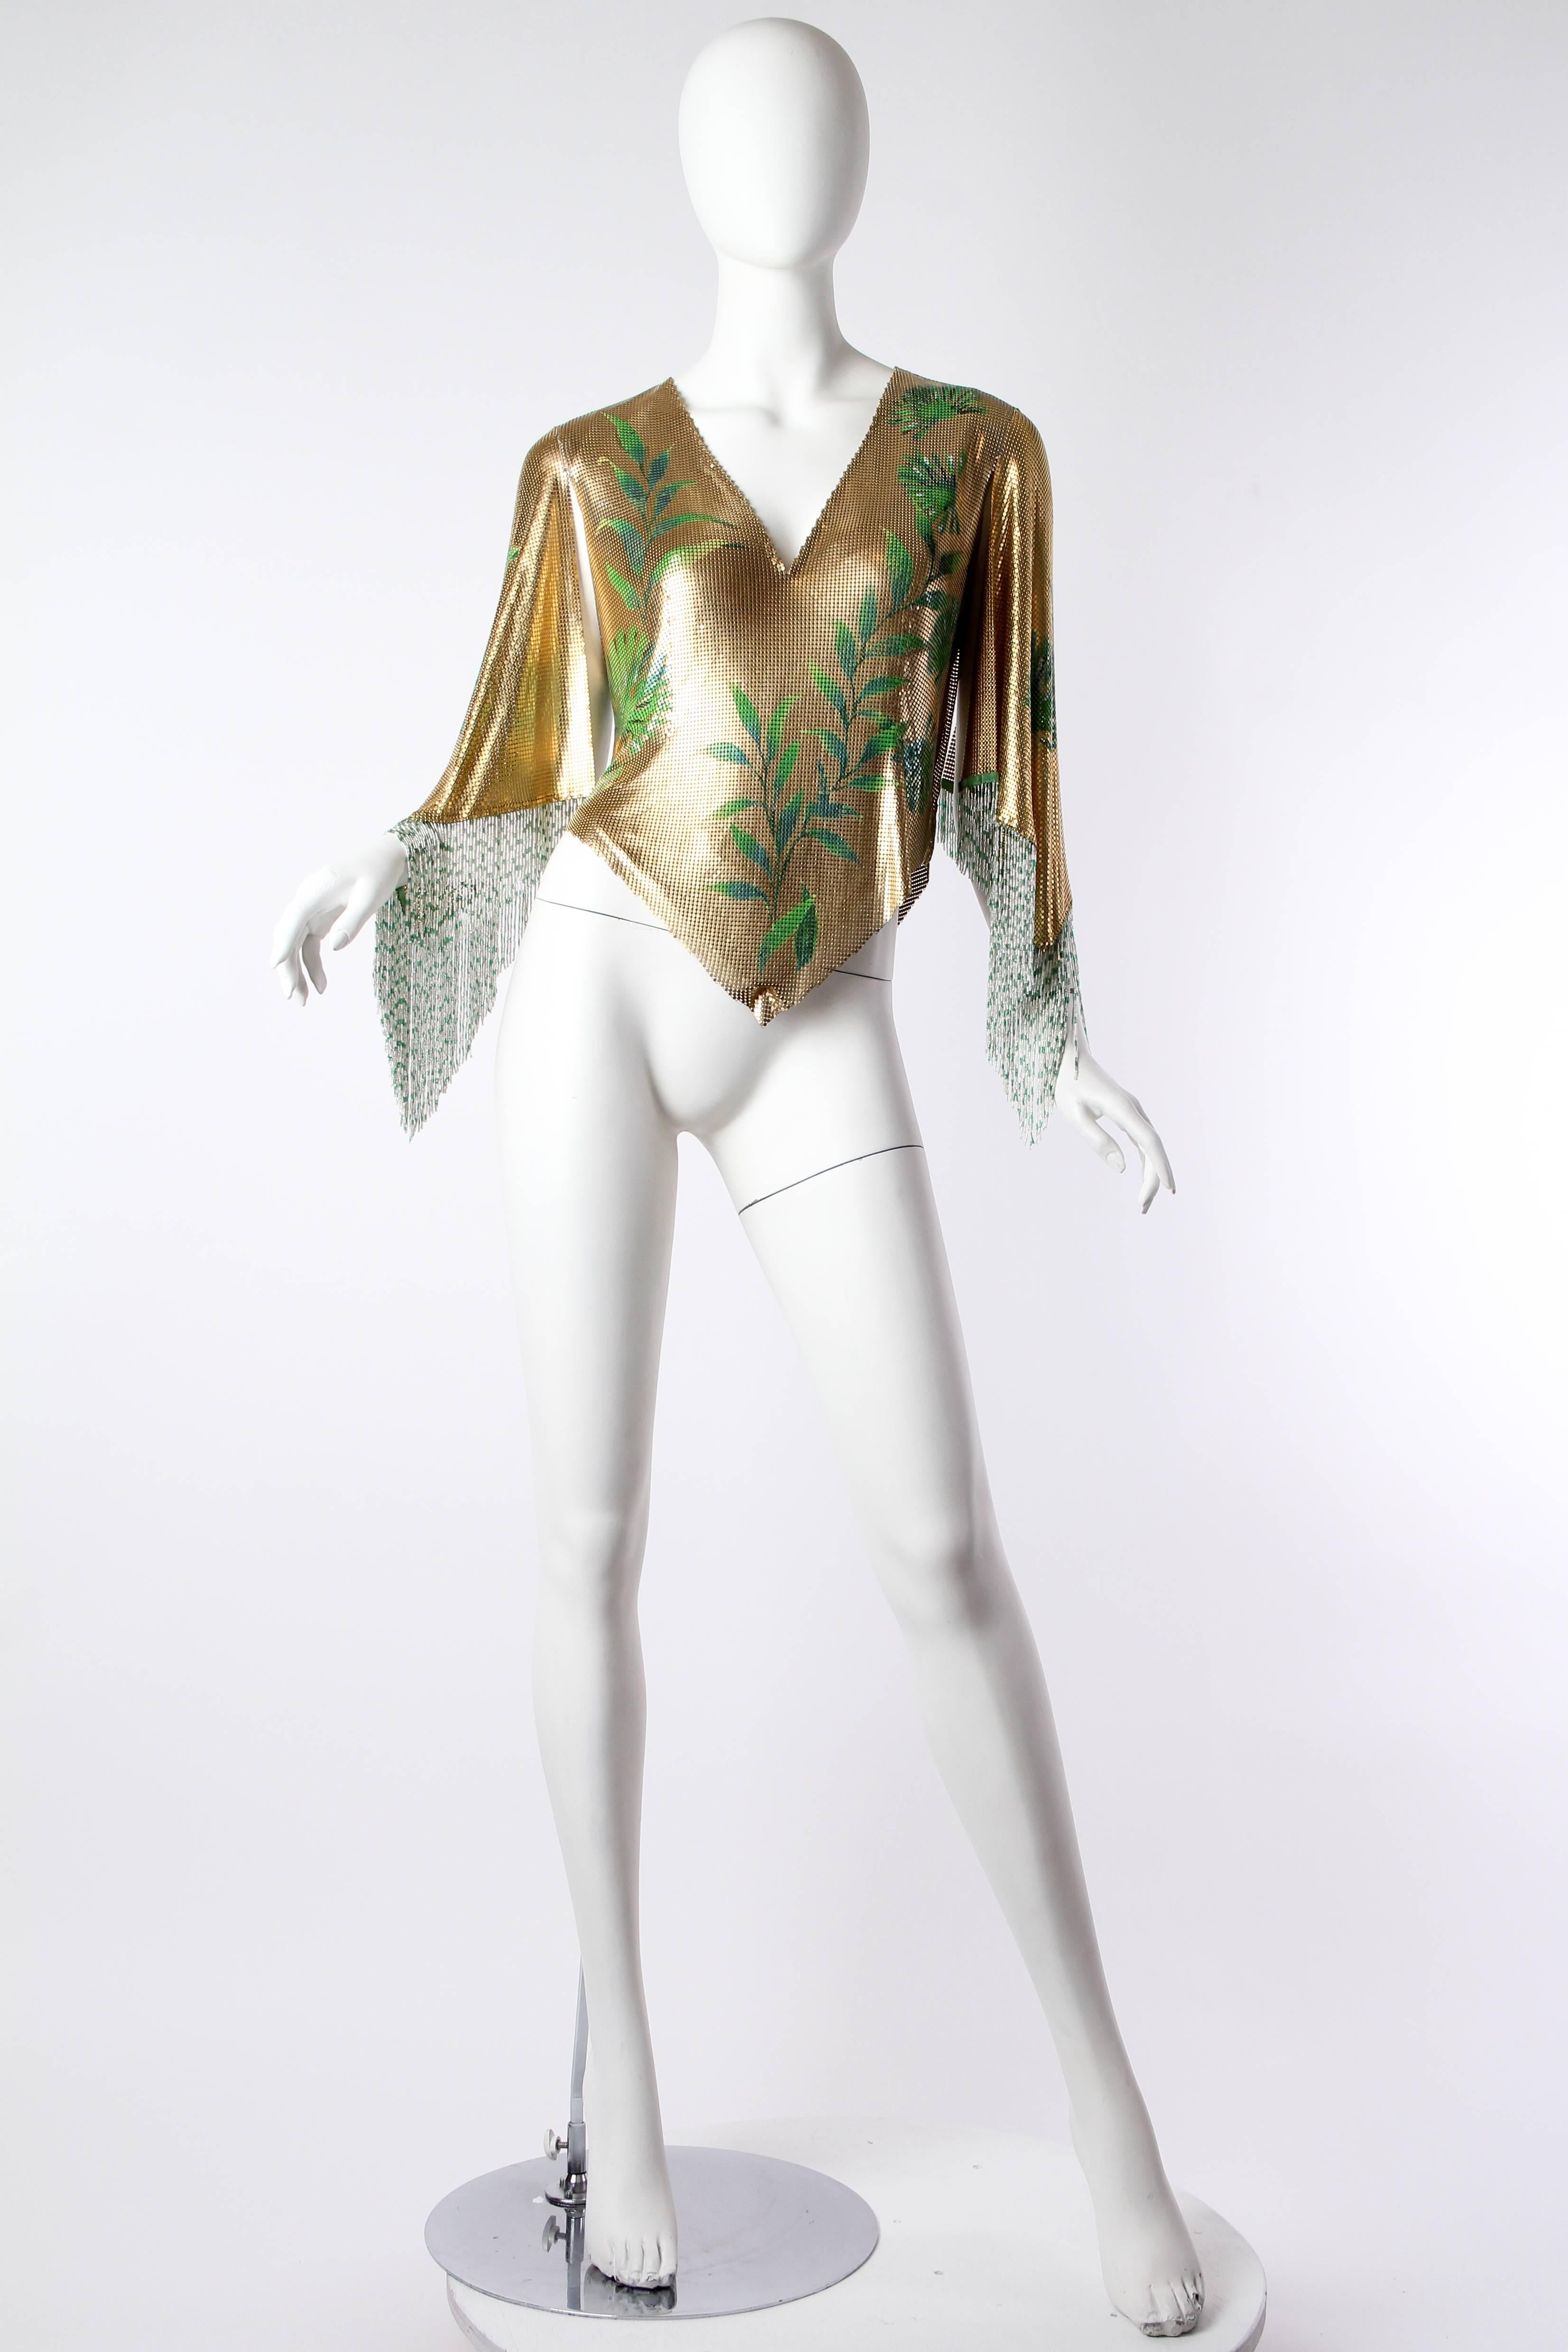 Unheard of effortless glamour in this museum piece from the late 21st century's most ostentatiously luxurious designer. This same fortune teller can be seen in an Atelier Versace silk scarf from the period. The piece is fully lined and in phenomenal